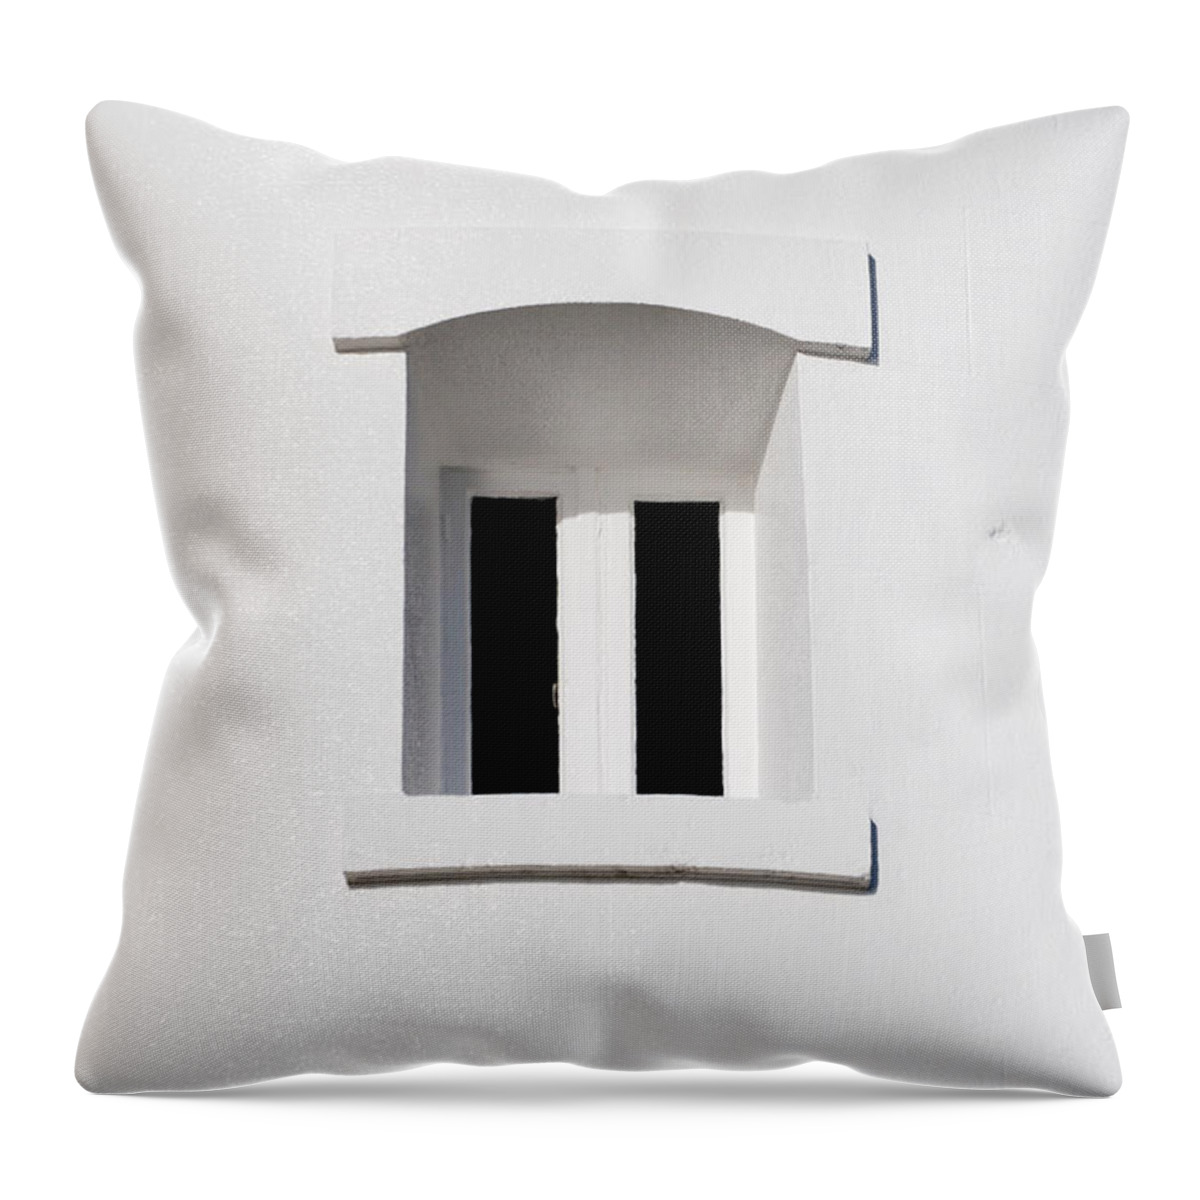 Stark Throw Pillow featuring the photograph A Window In White by Wendy Wilton